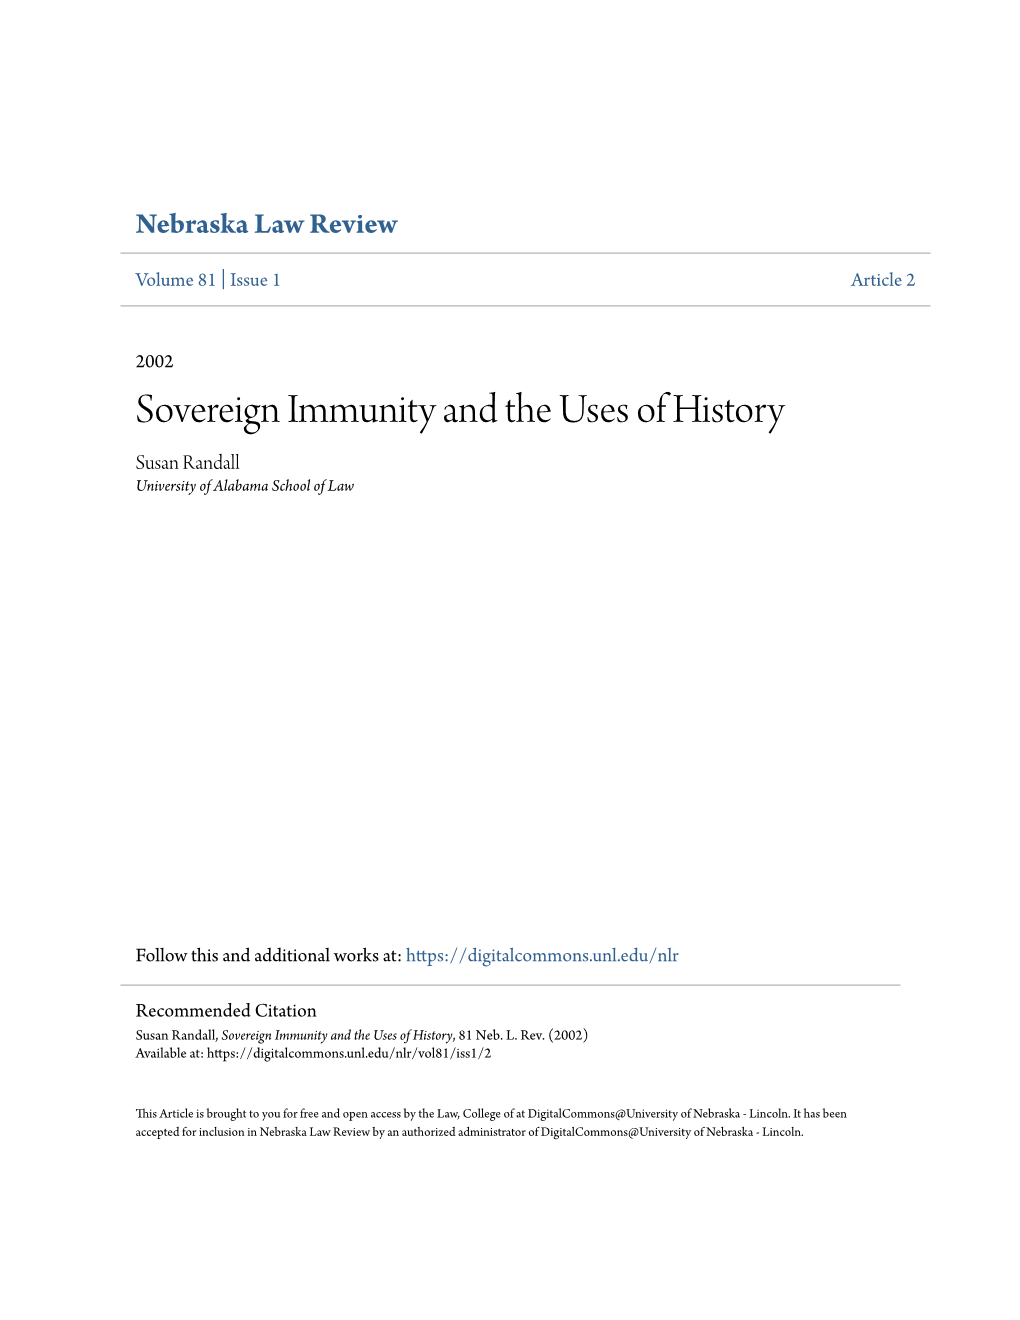 Sovereign Immunity and the Uses of History Susan Randall University of Alabama School of Law